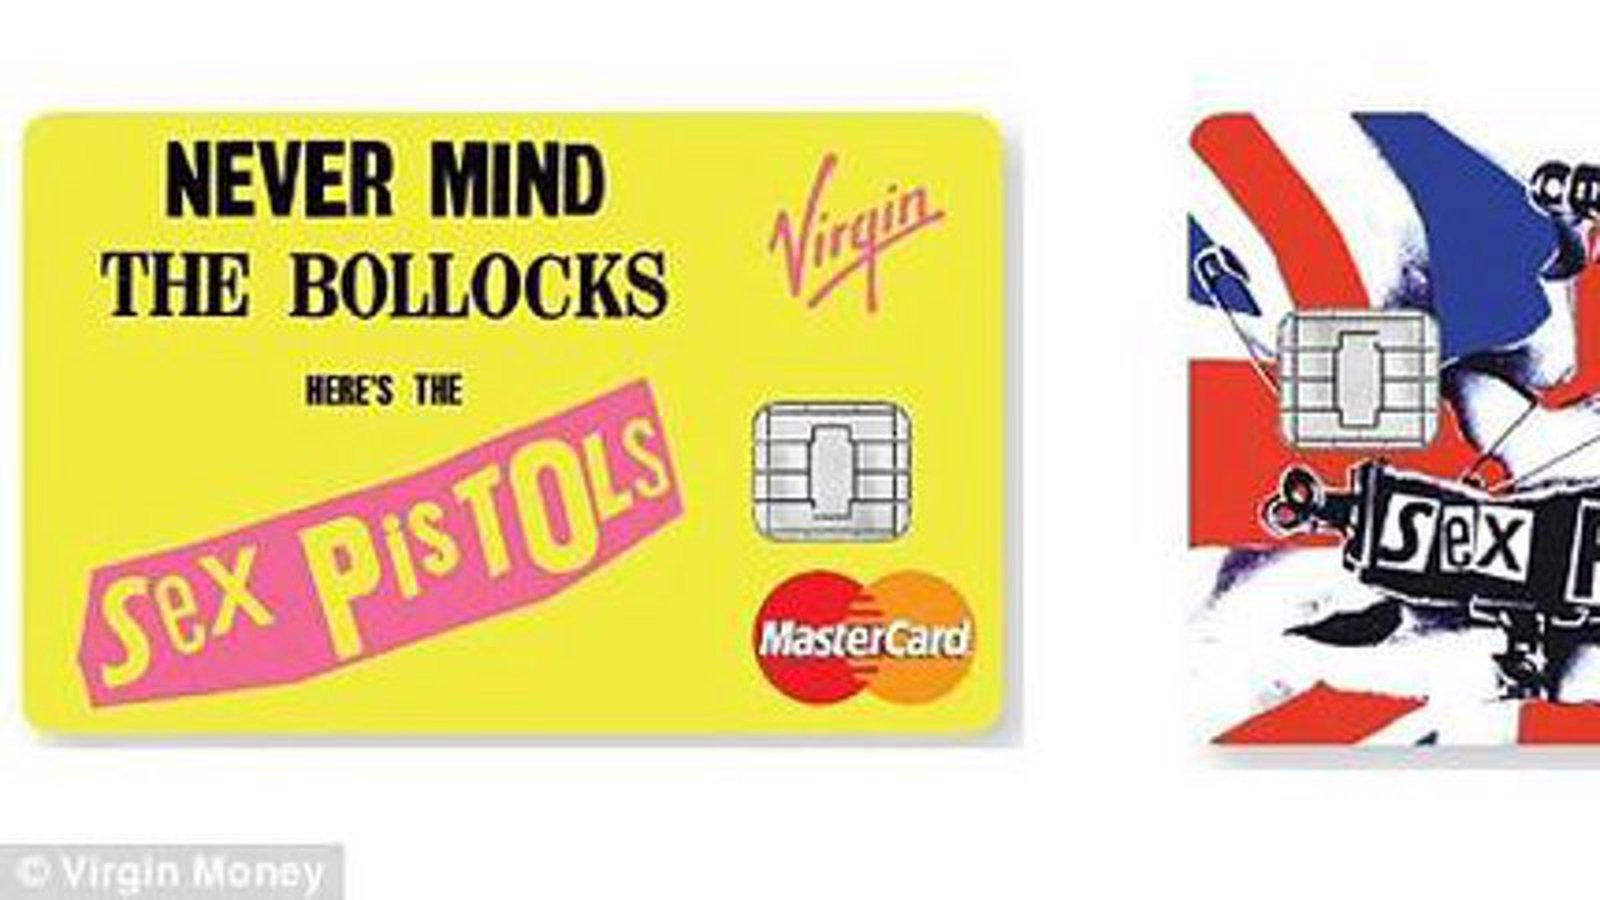 Sex Pistols To Feature On New Credit Card